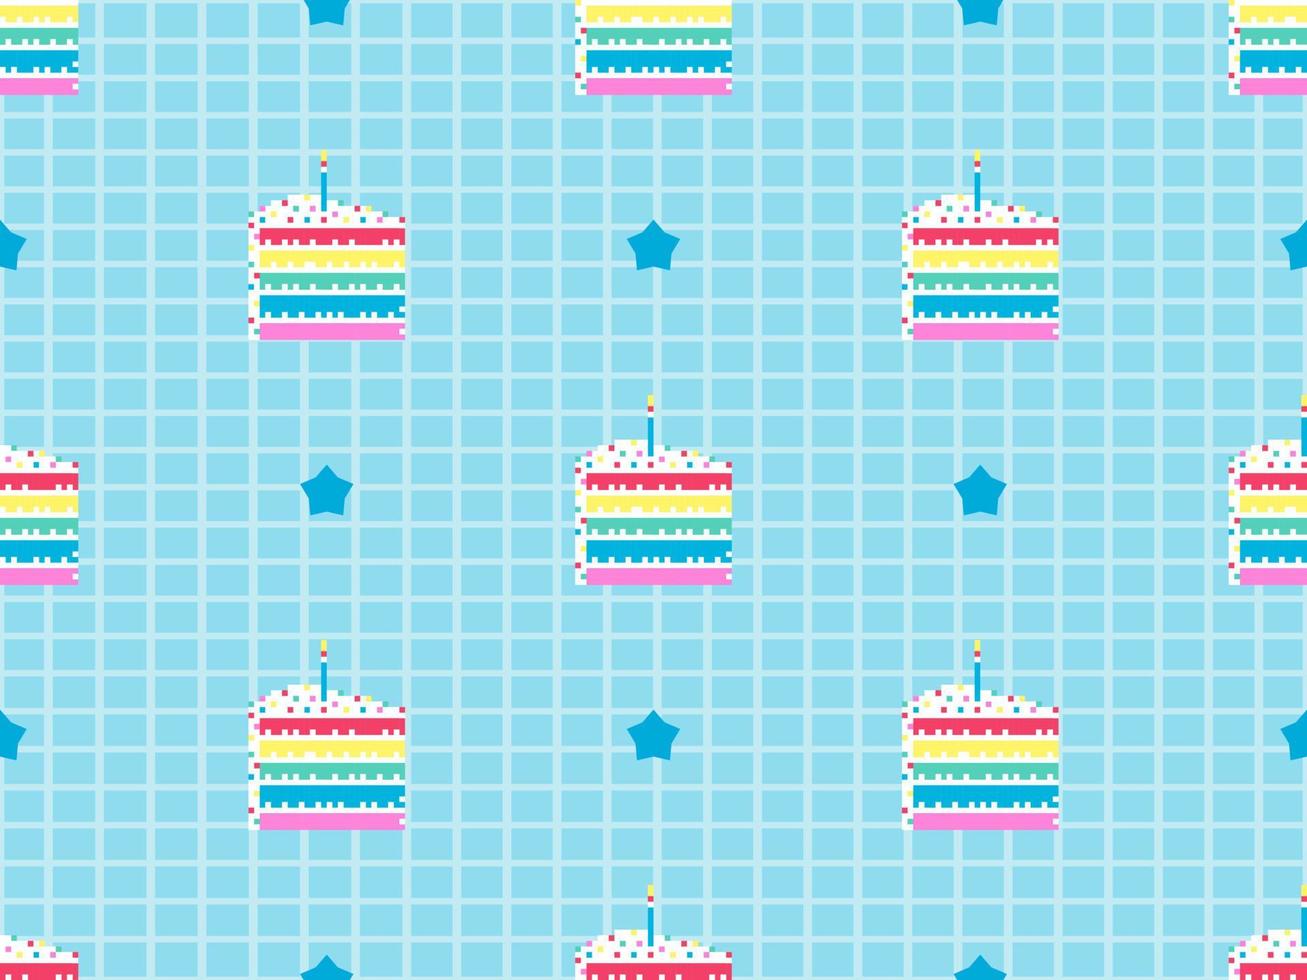 Cake cartoon character seamless pattern on blue background.  Pixel style vector